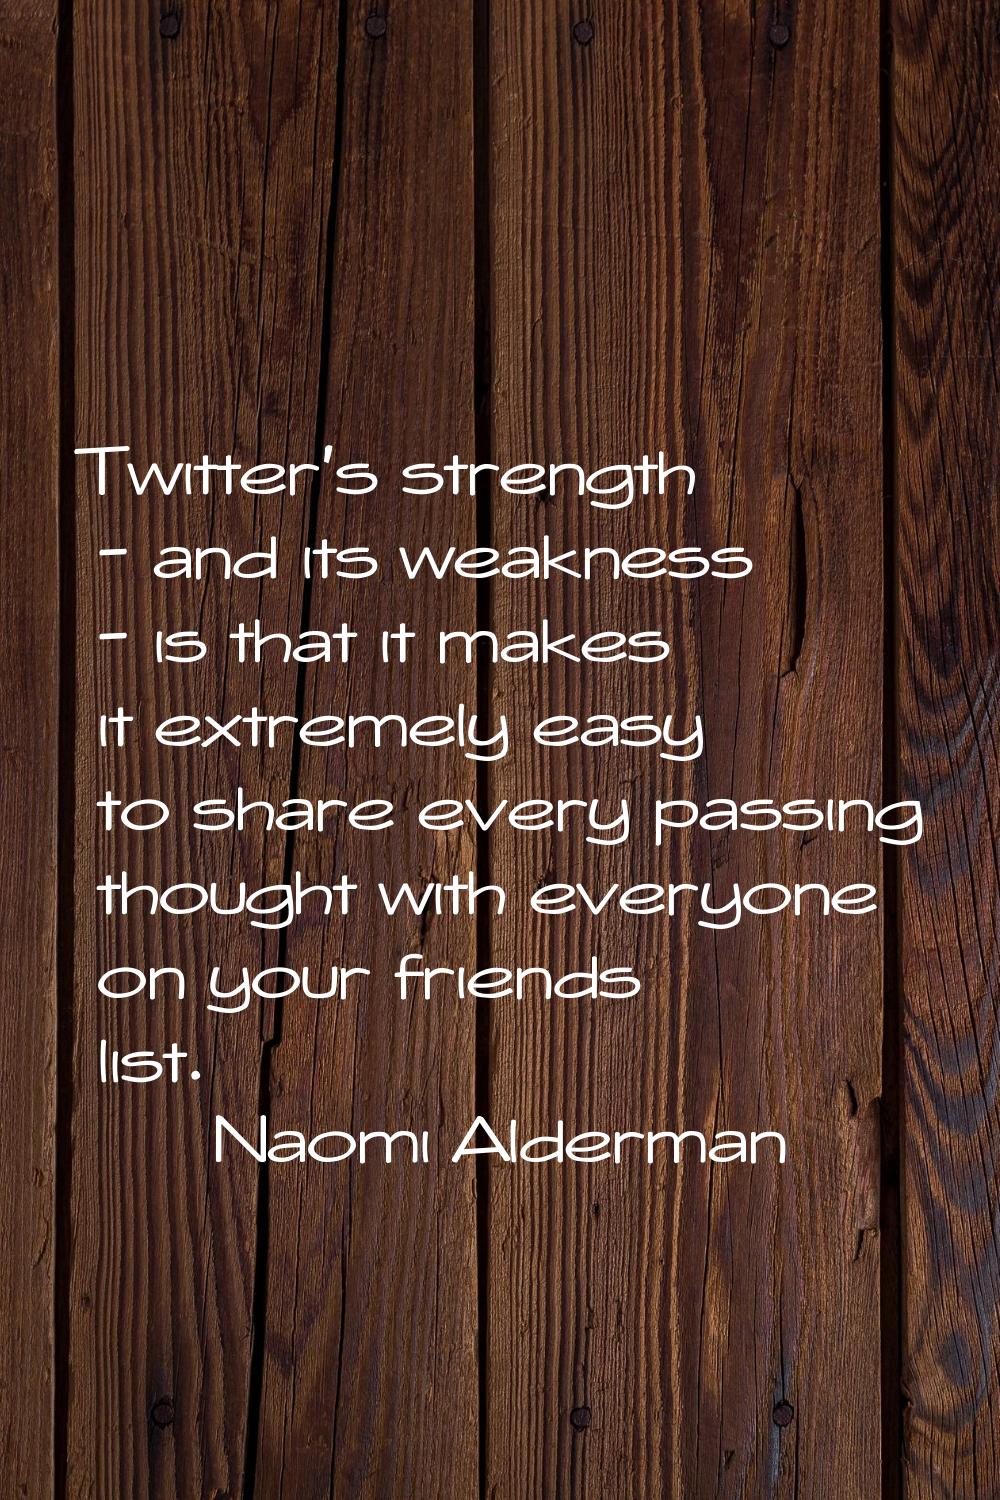 Twitter's strength - and its weakness - is that it makes it extremely easy to share every passing t